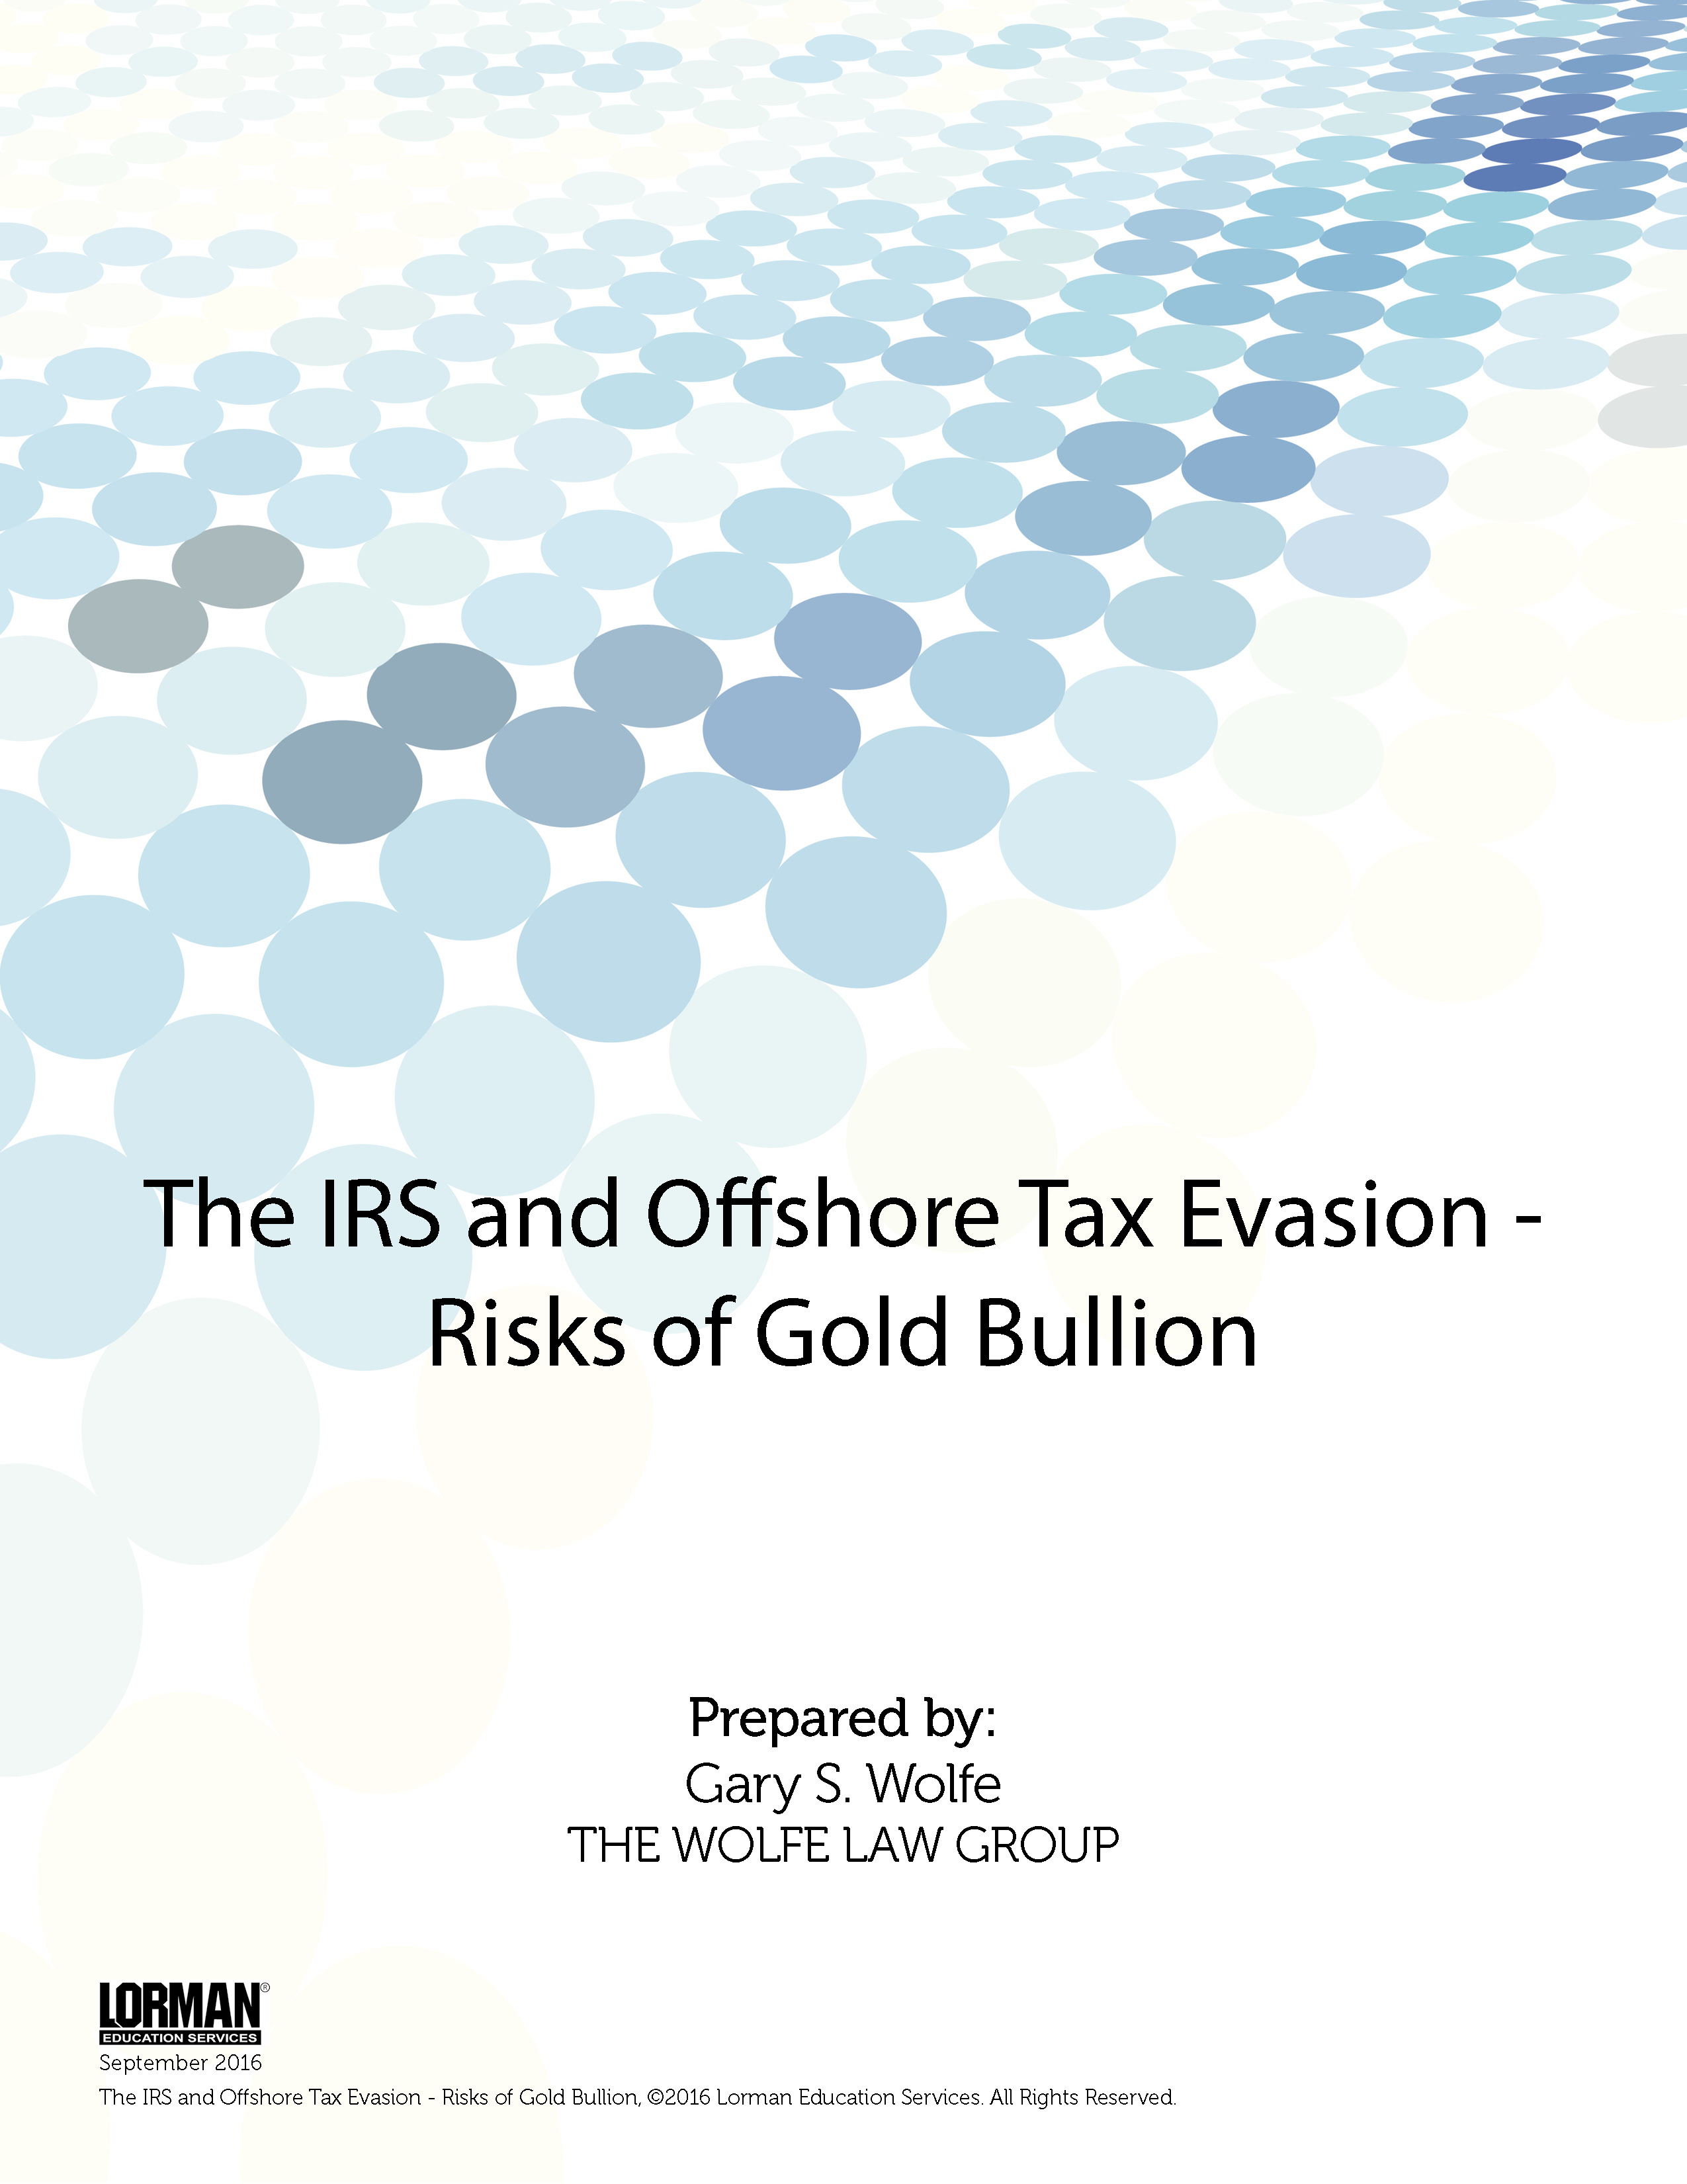 The IRS and Offshore Tax Evasion - Risks of Gold Bullion